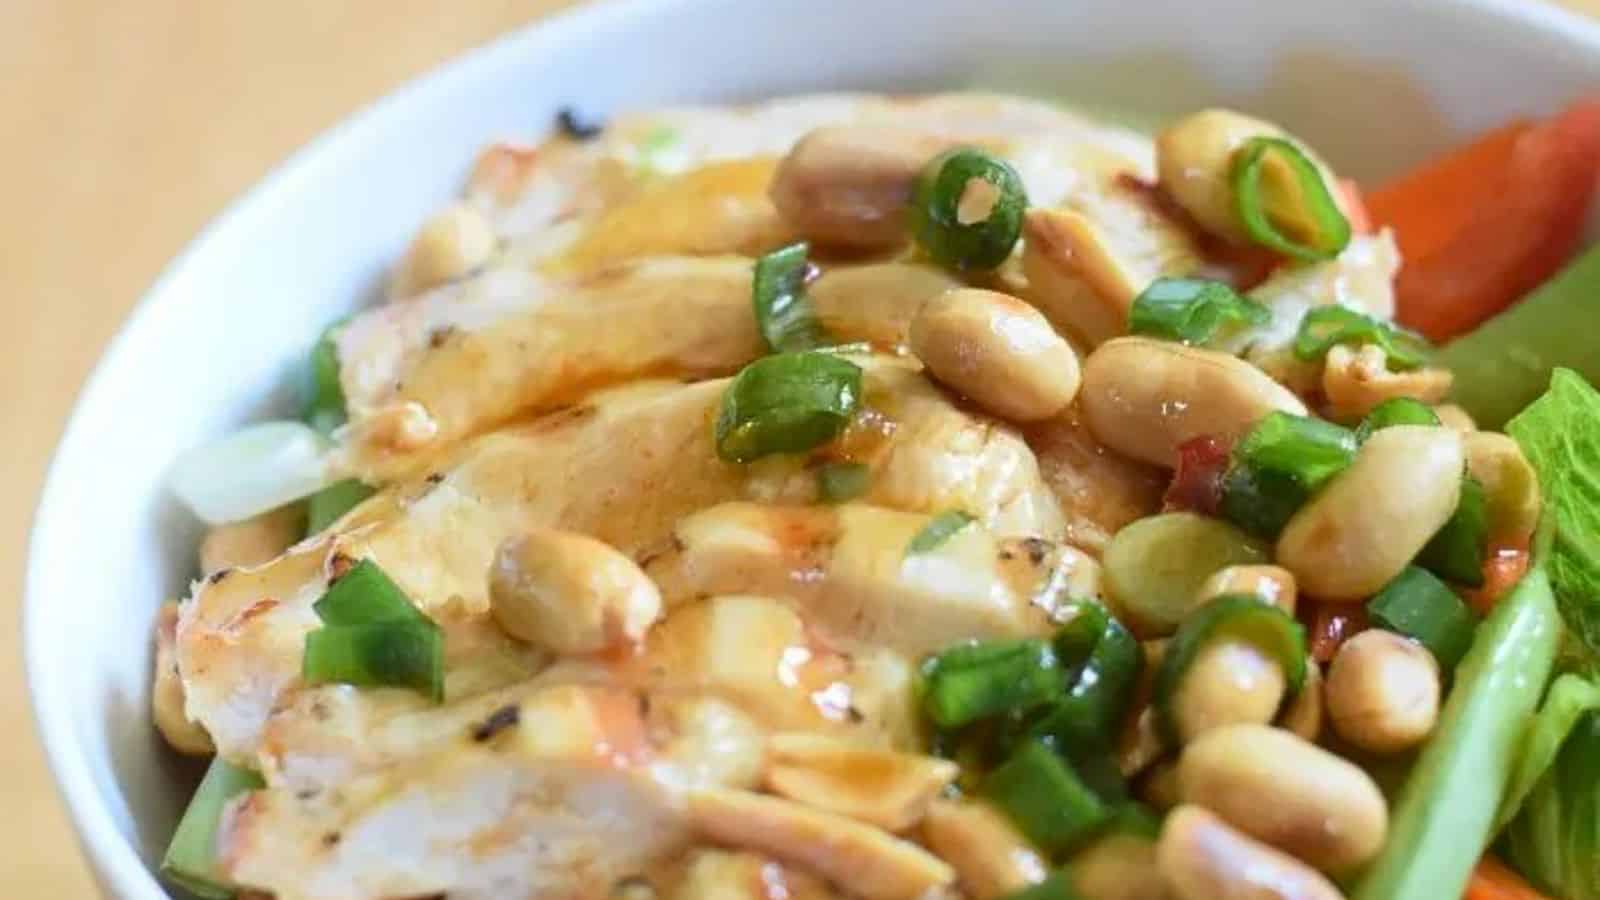 Image shows a closeup of Kung Pao Chicken Salad in a white bowl.